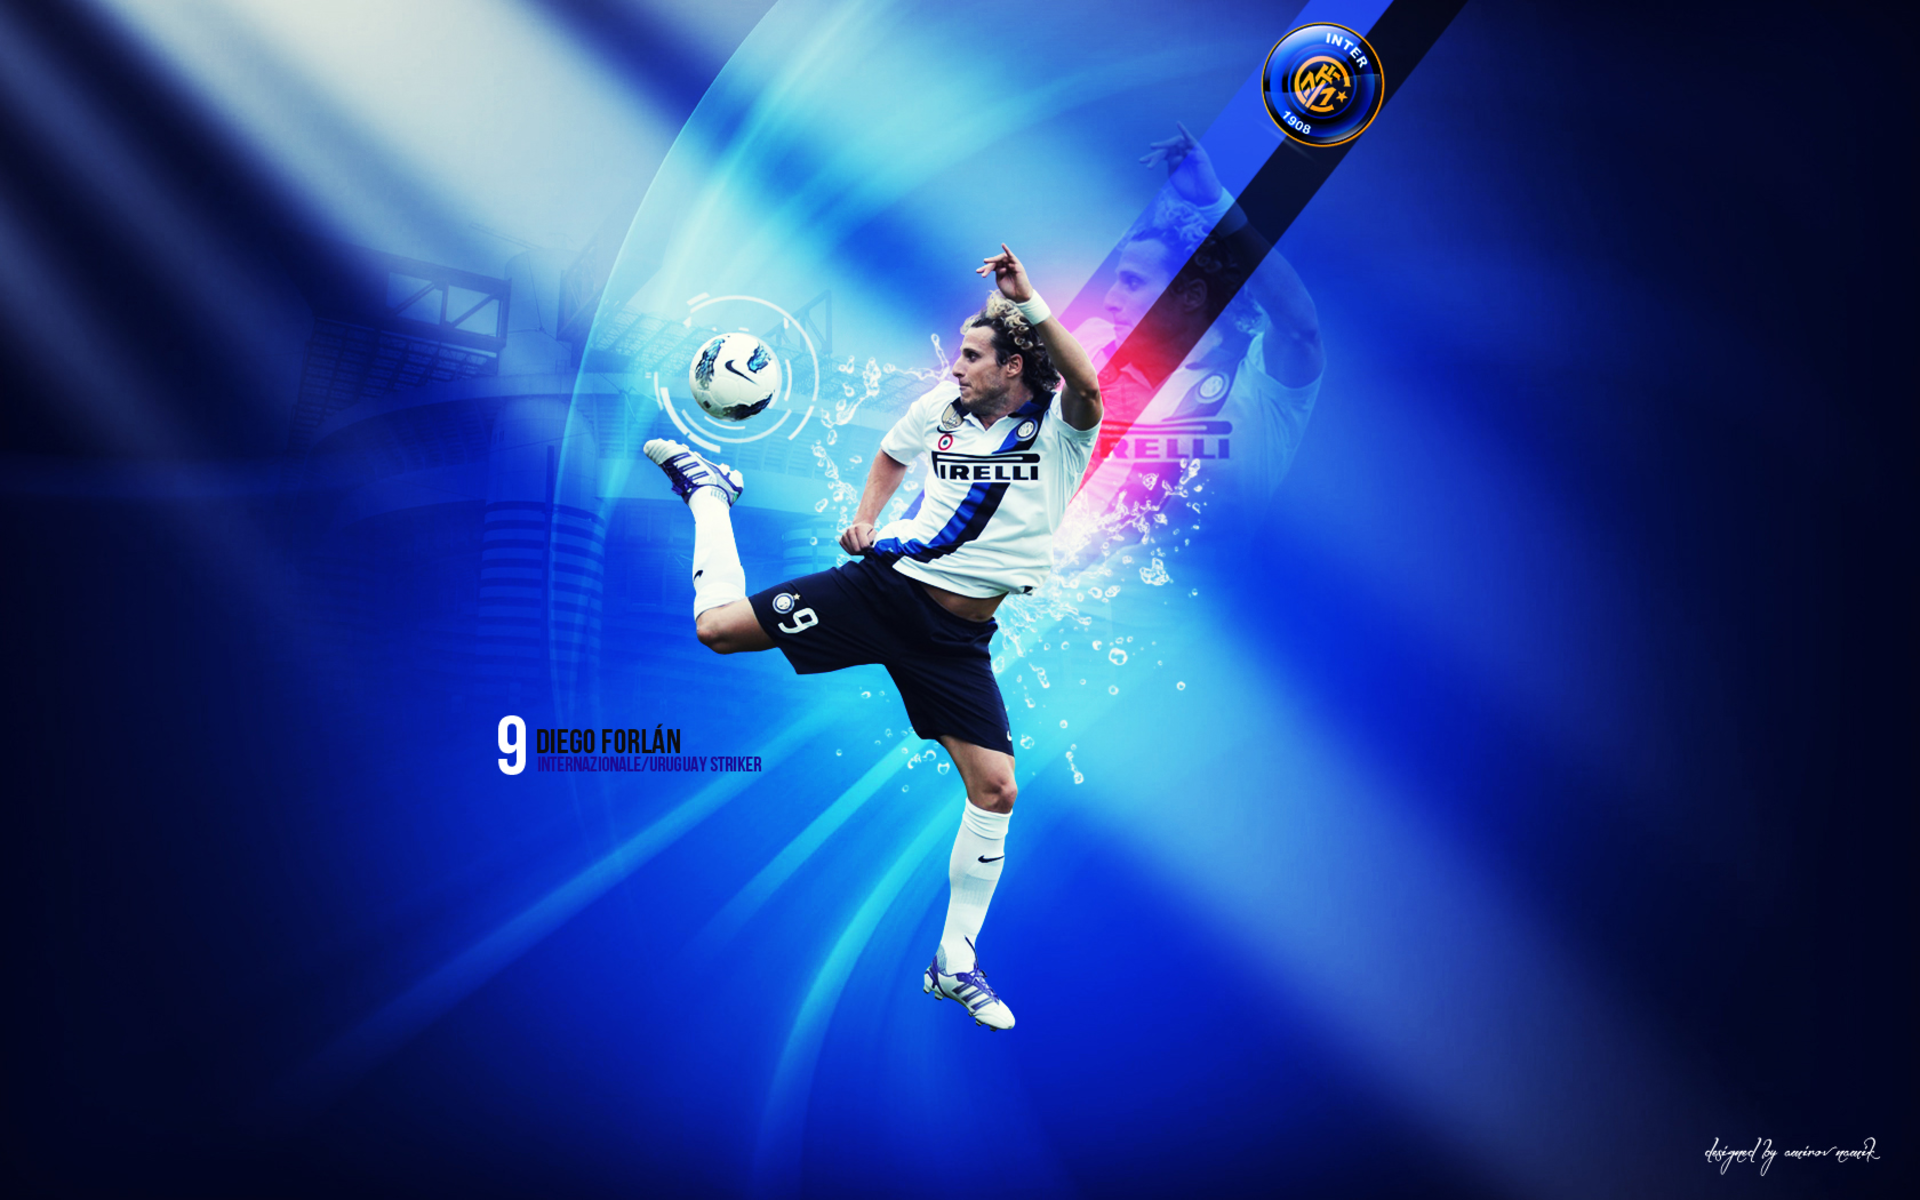 Diego Forlan Wallpapers